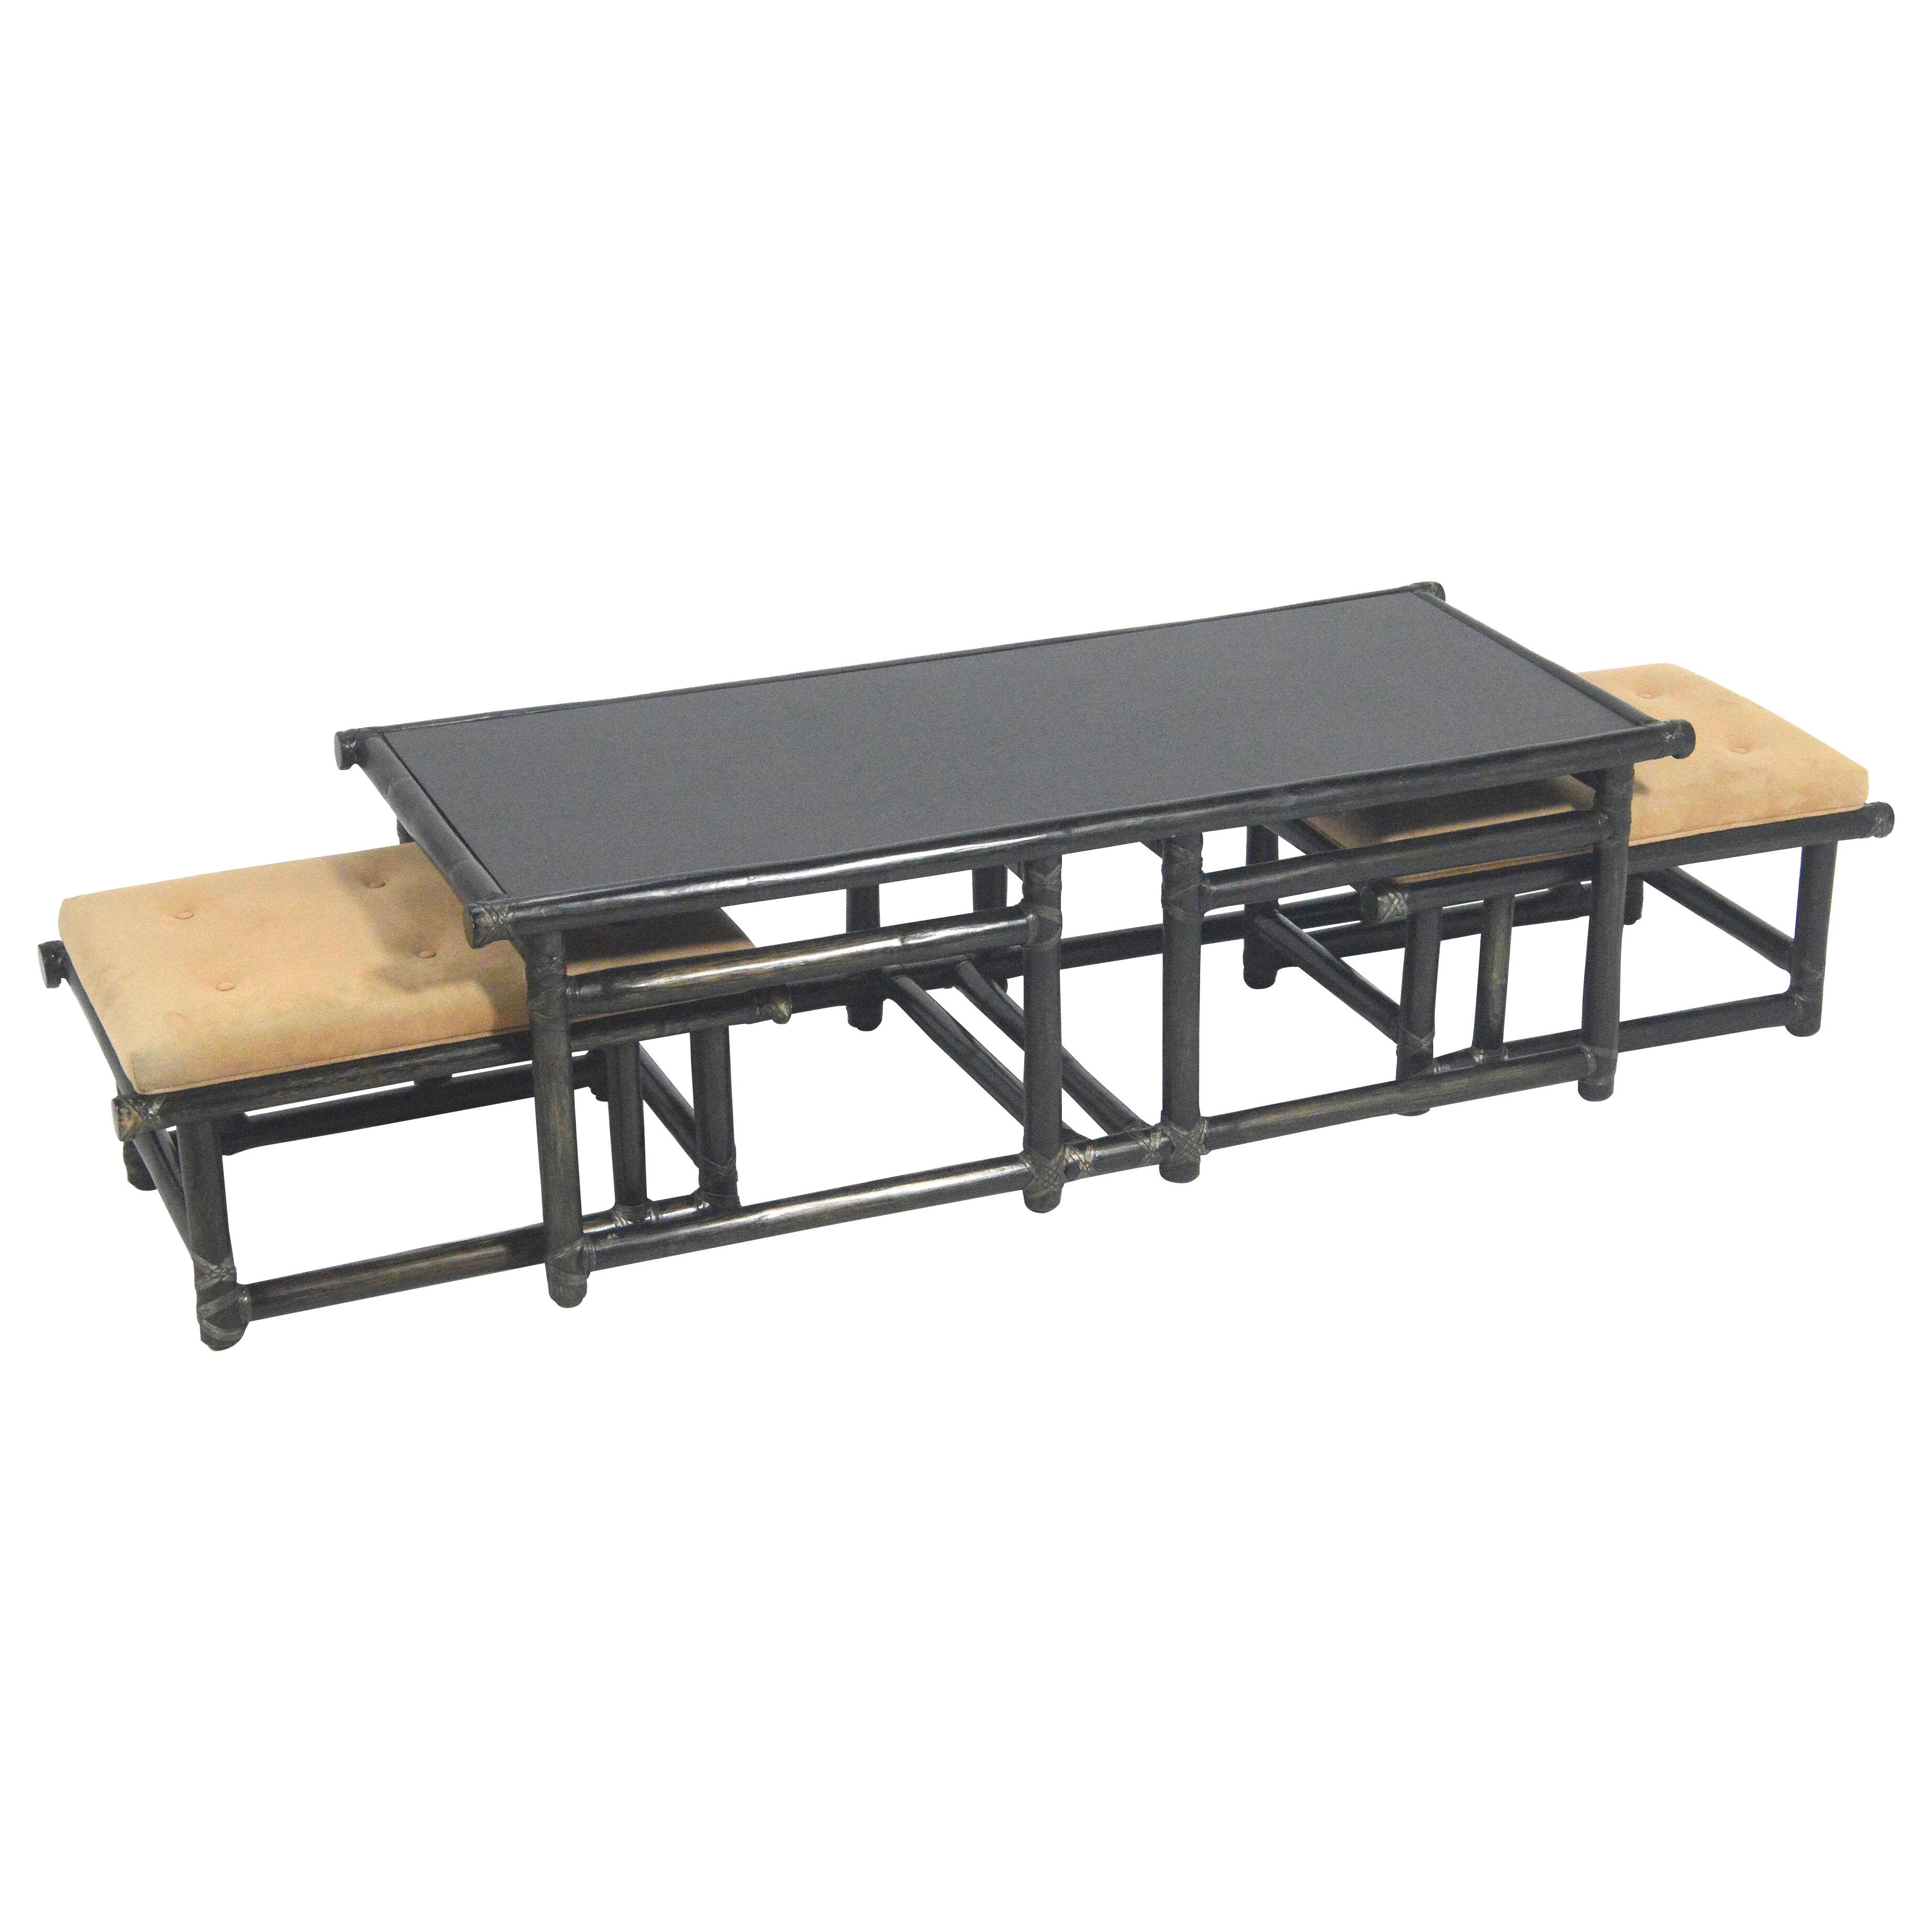 John McGuire Model 57-3 Table and Nesting Benches